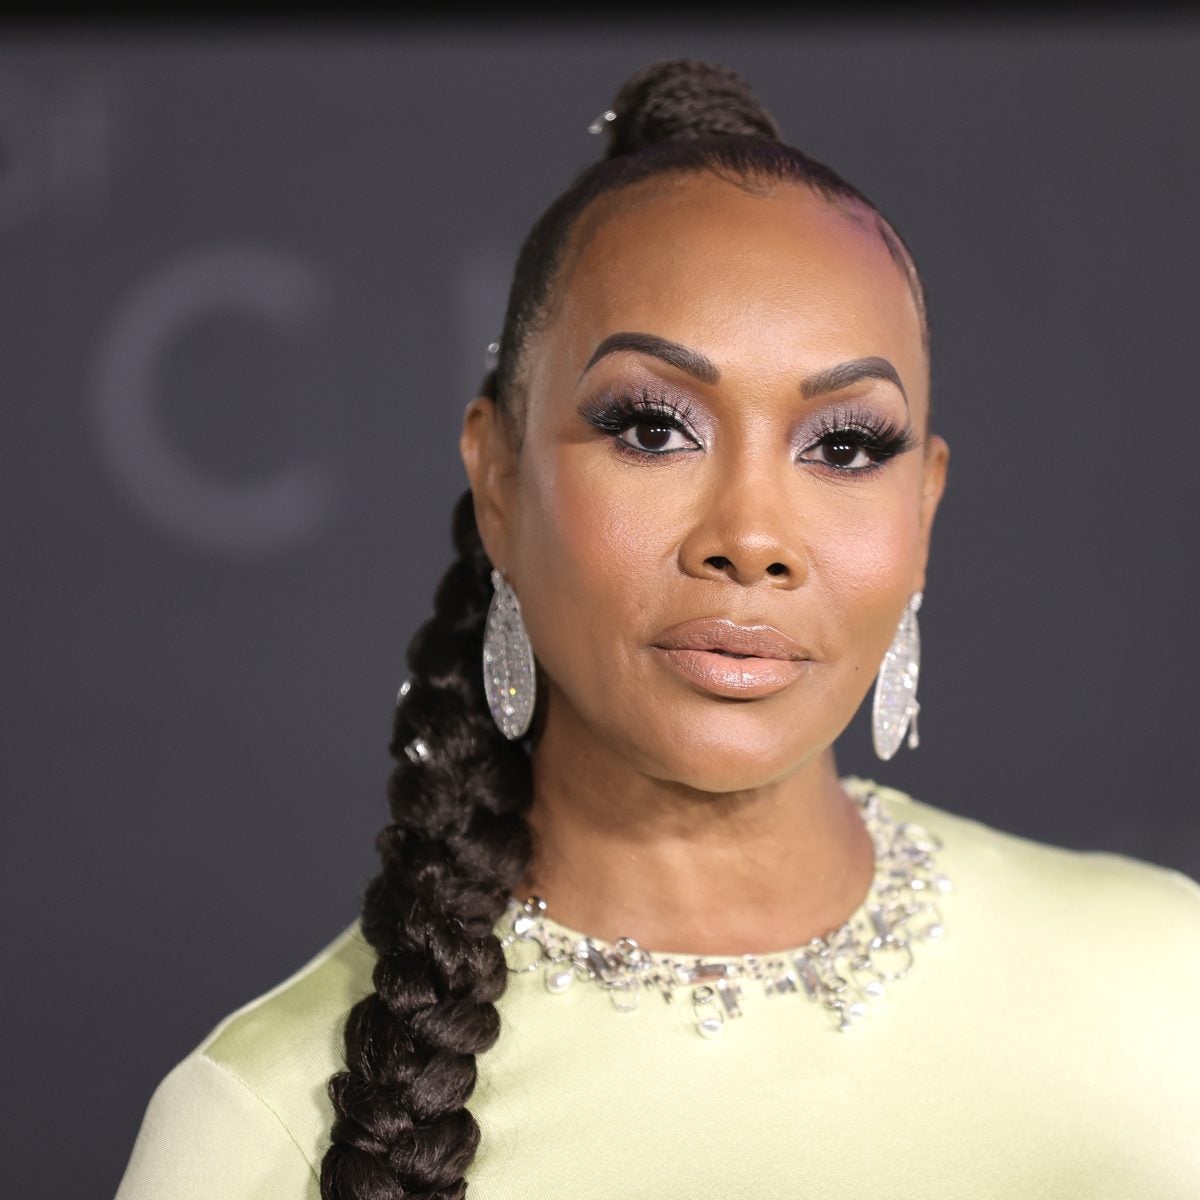 Vivica A. Fox On Motherhood: 'I Never Met The Man I Could Have Children With'